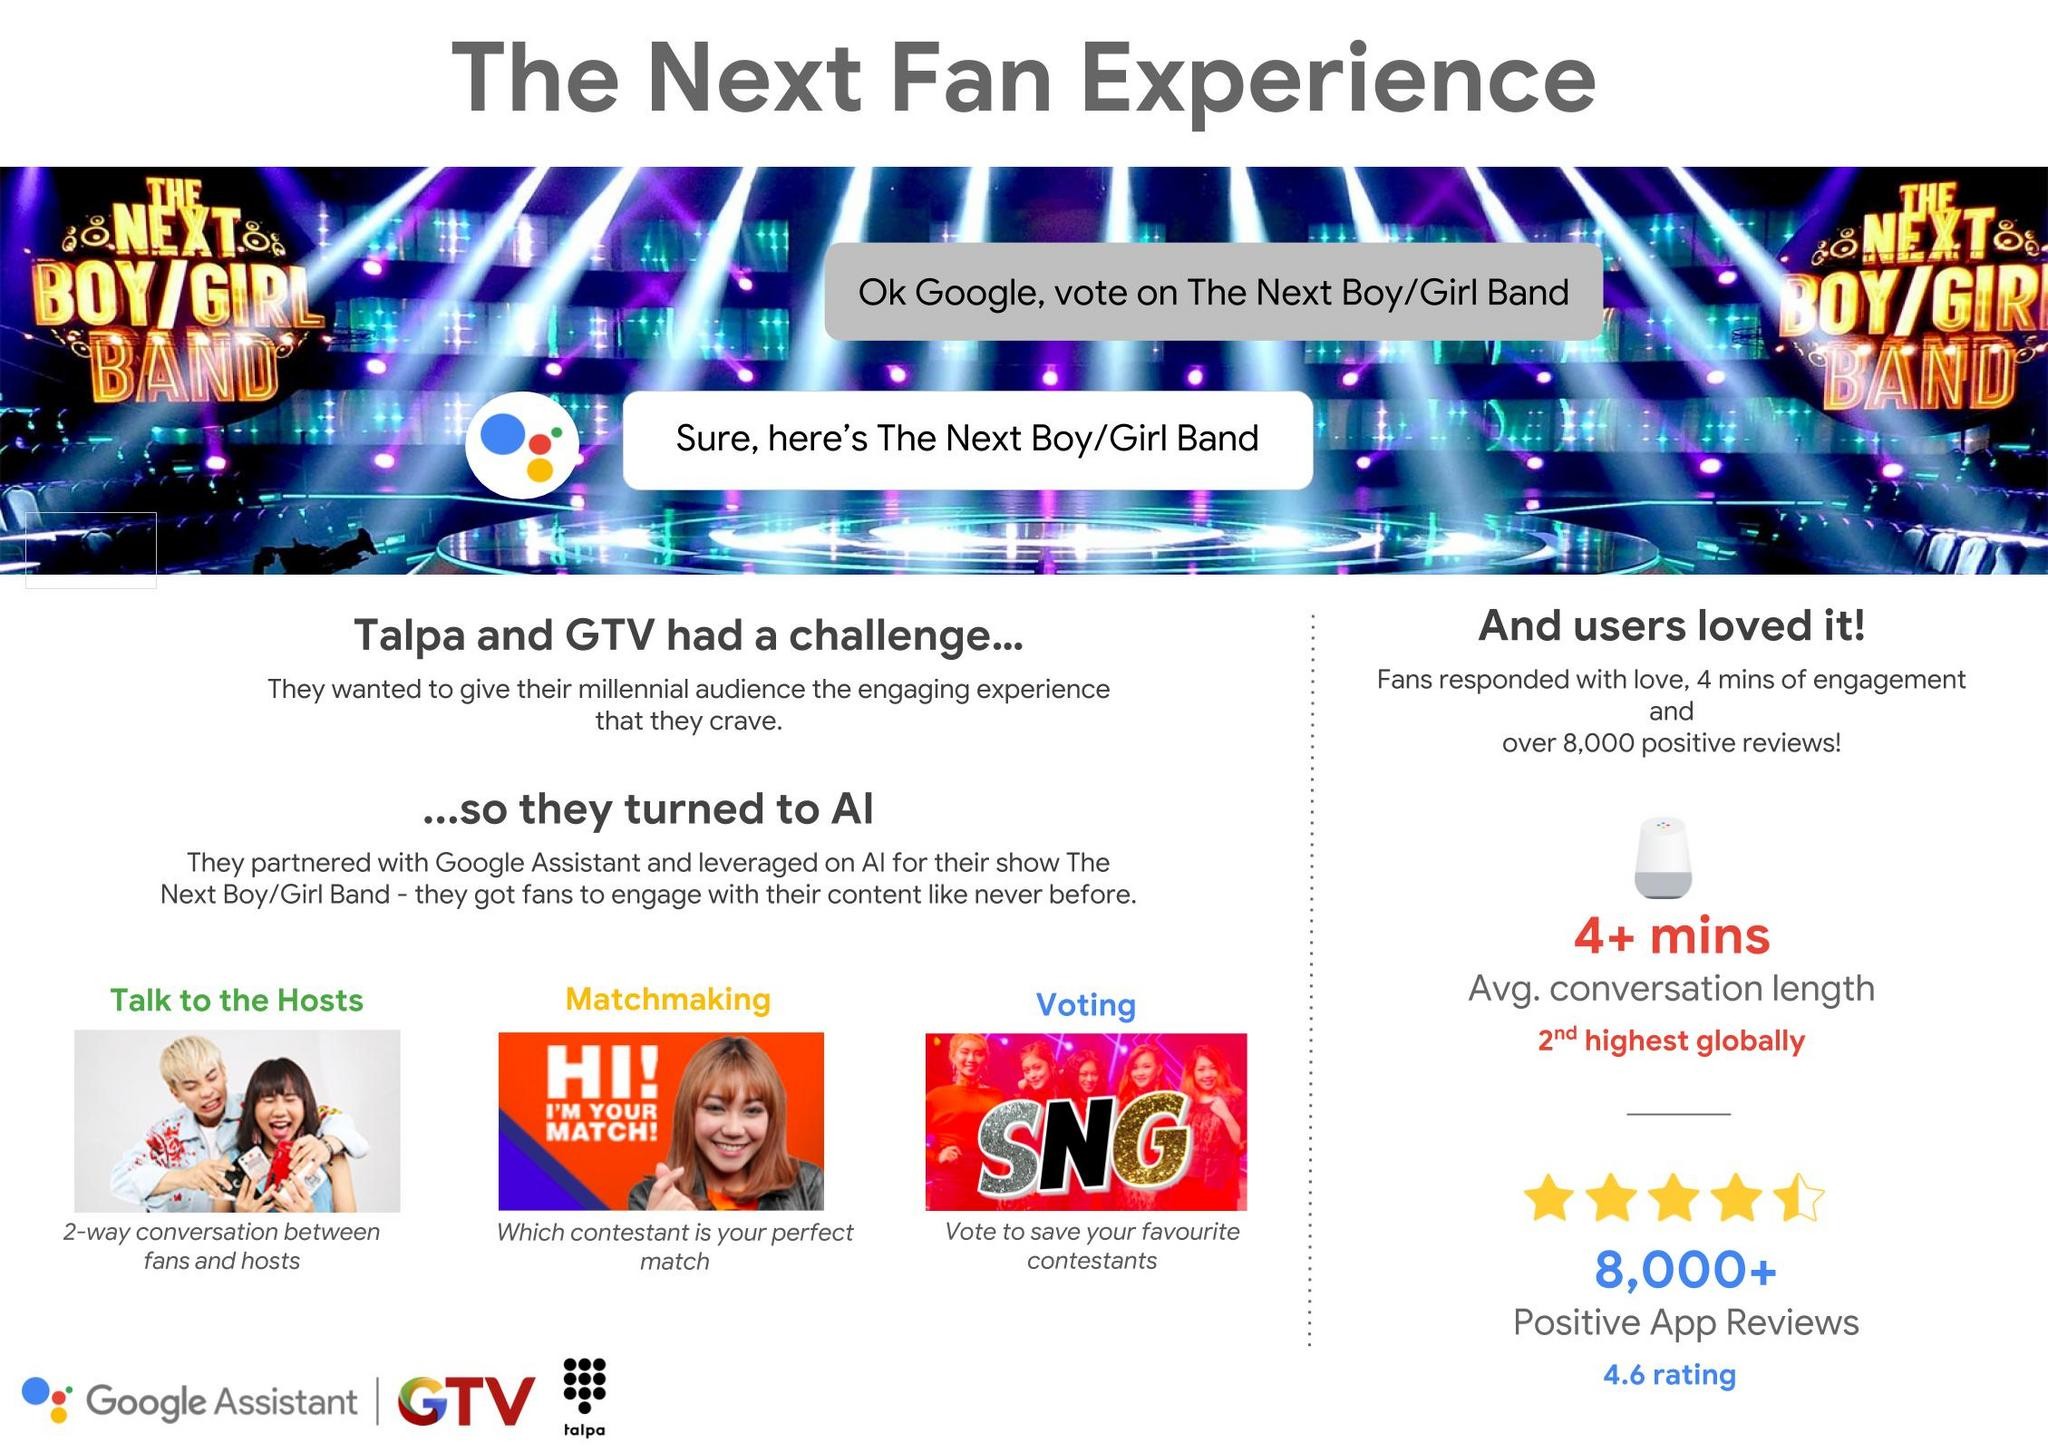 The Next Fan Experience